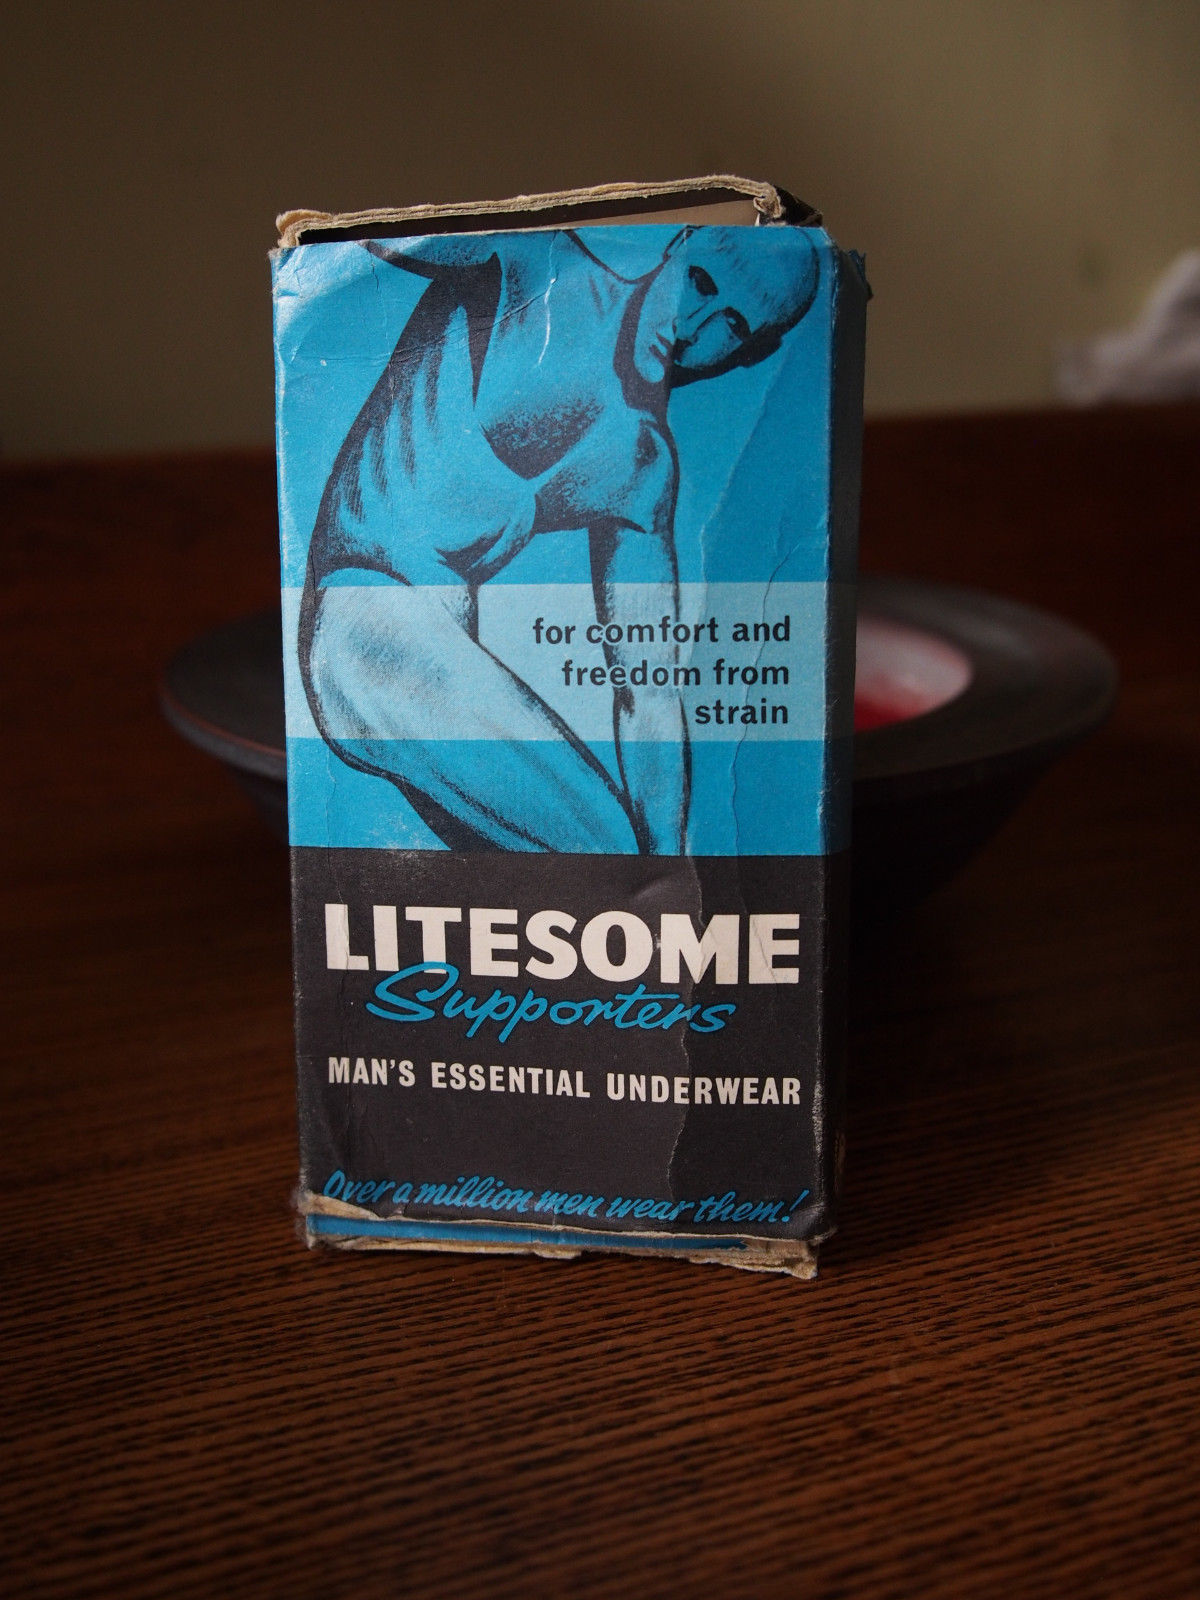 Litesome Supporters 02 19 2018a.jpg